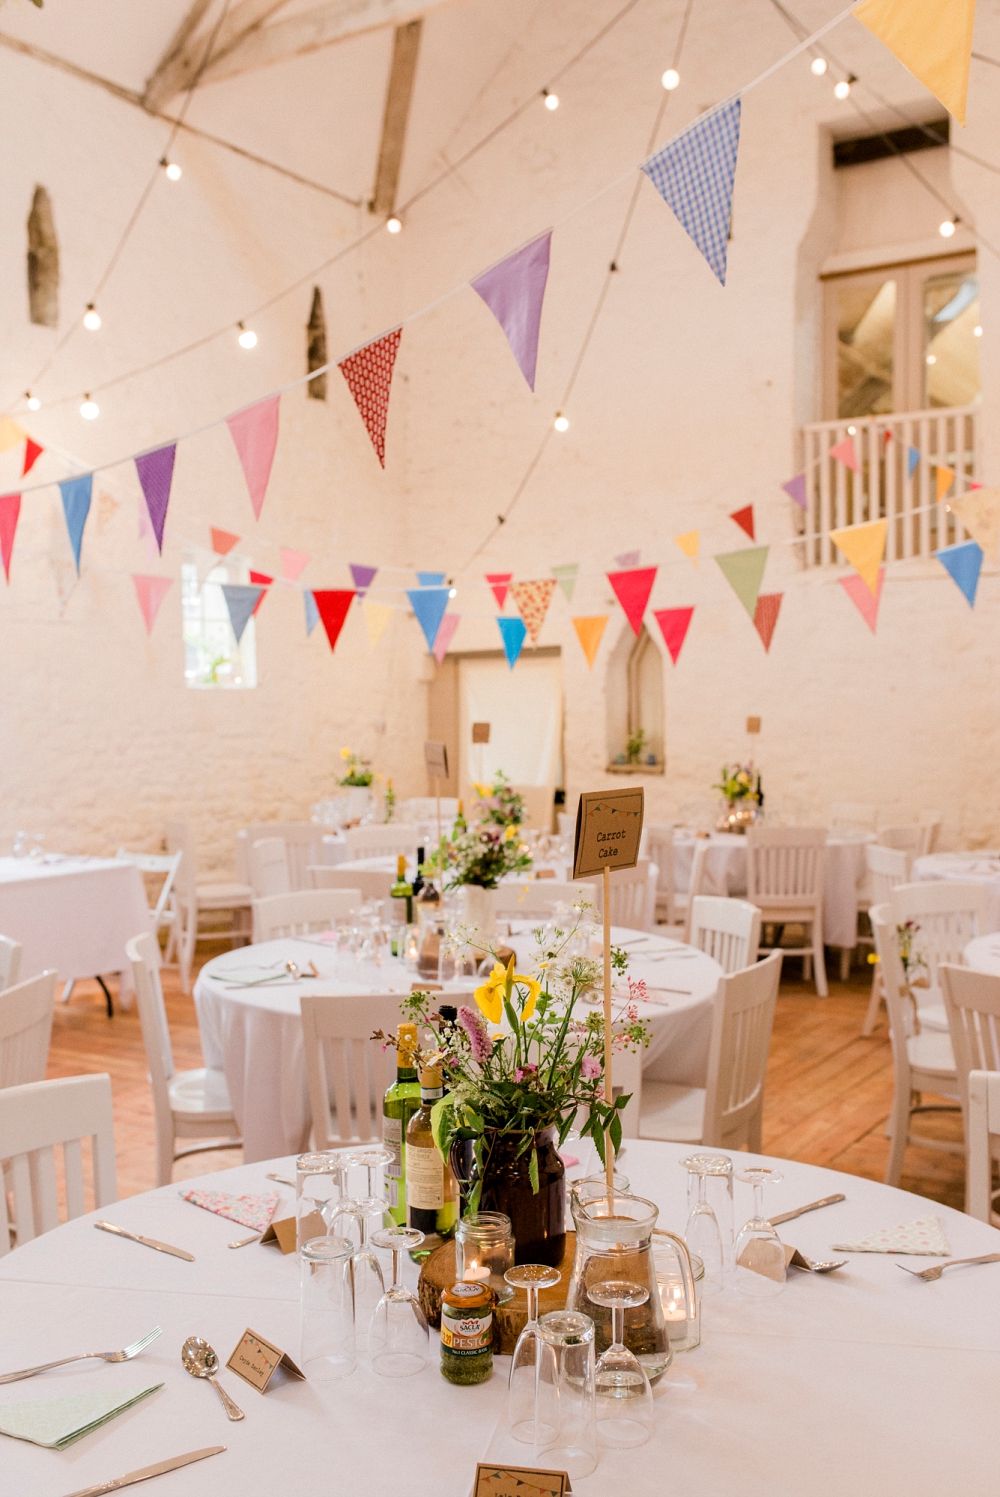 Barn Wedding Venues in the North West